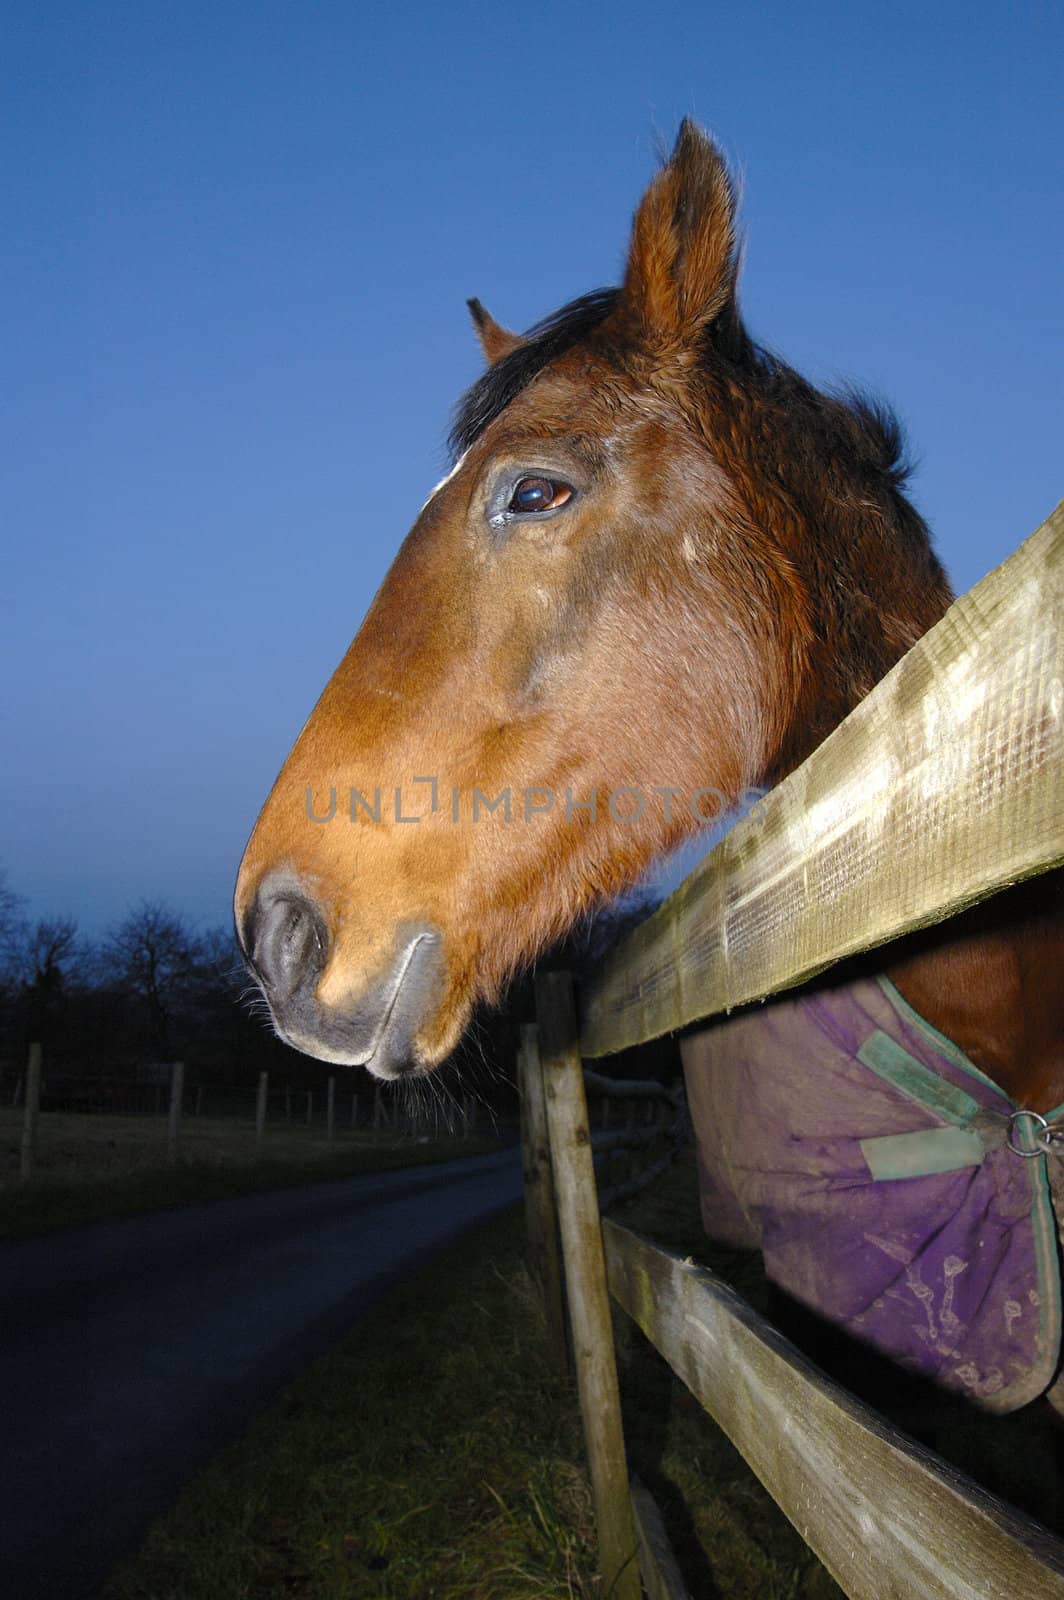 A chestnut horse, looking hopefully over the fence in the evening light. Space for copy in the blue sky or black beneath.